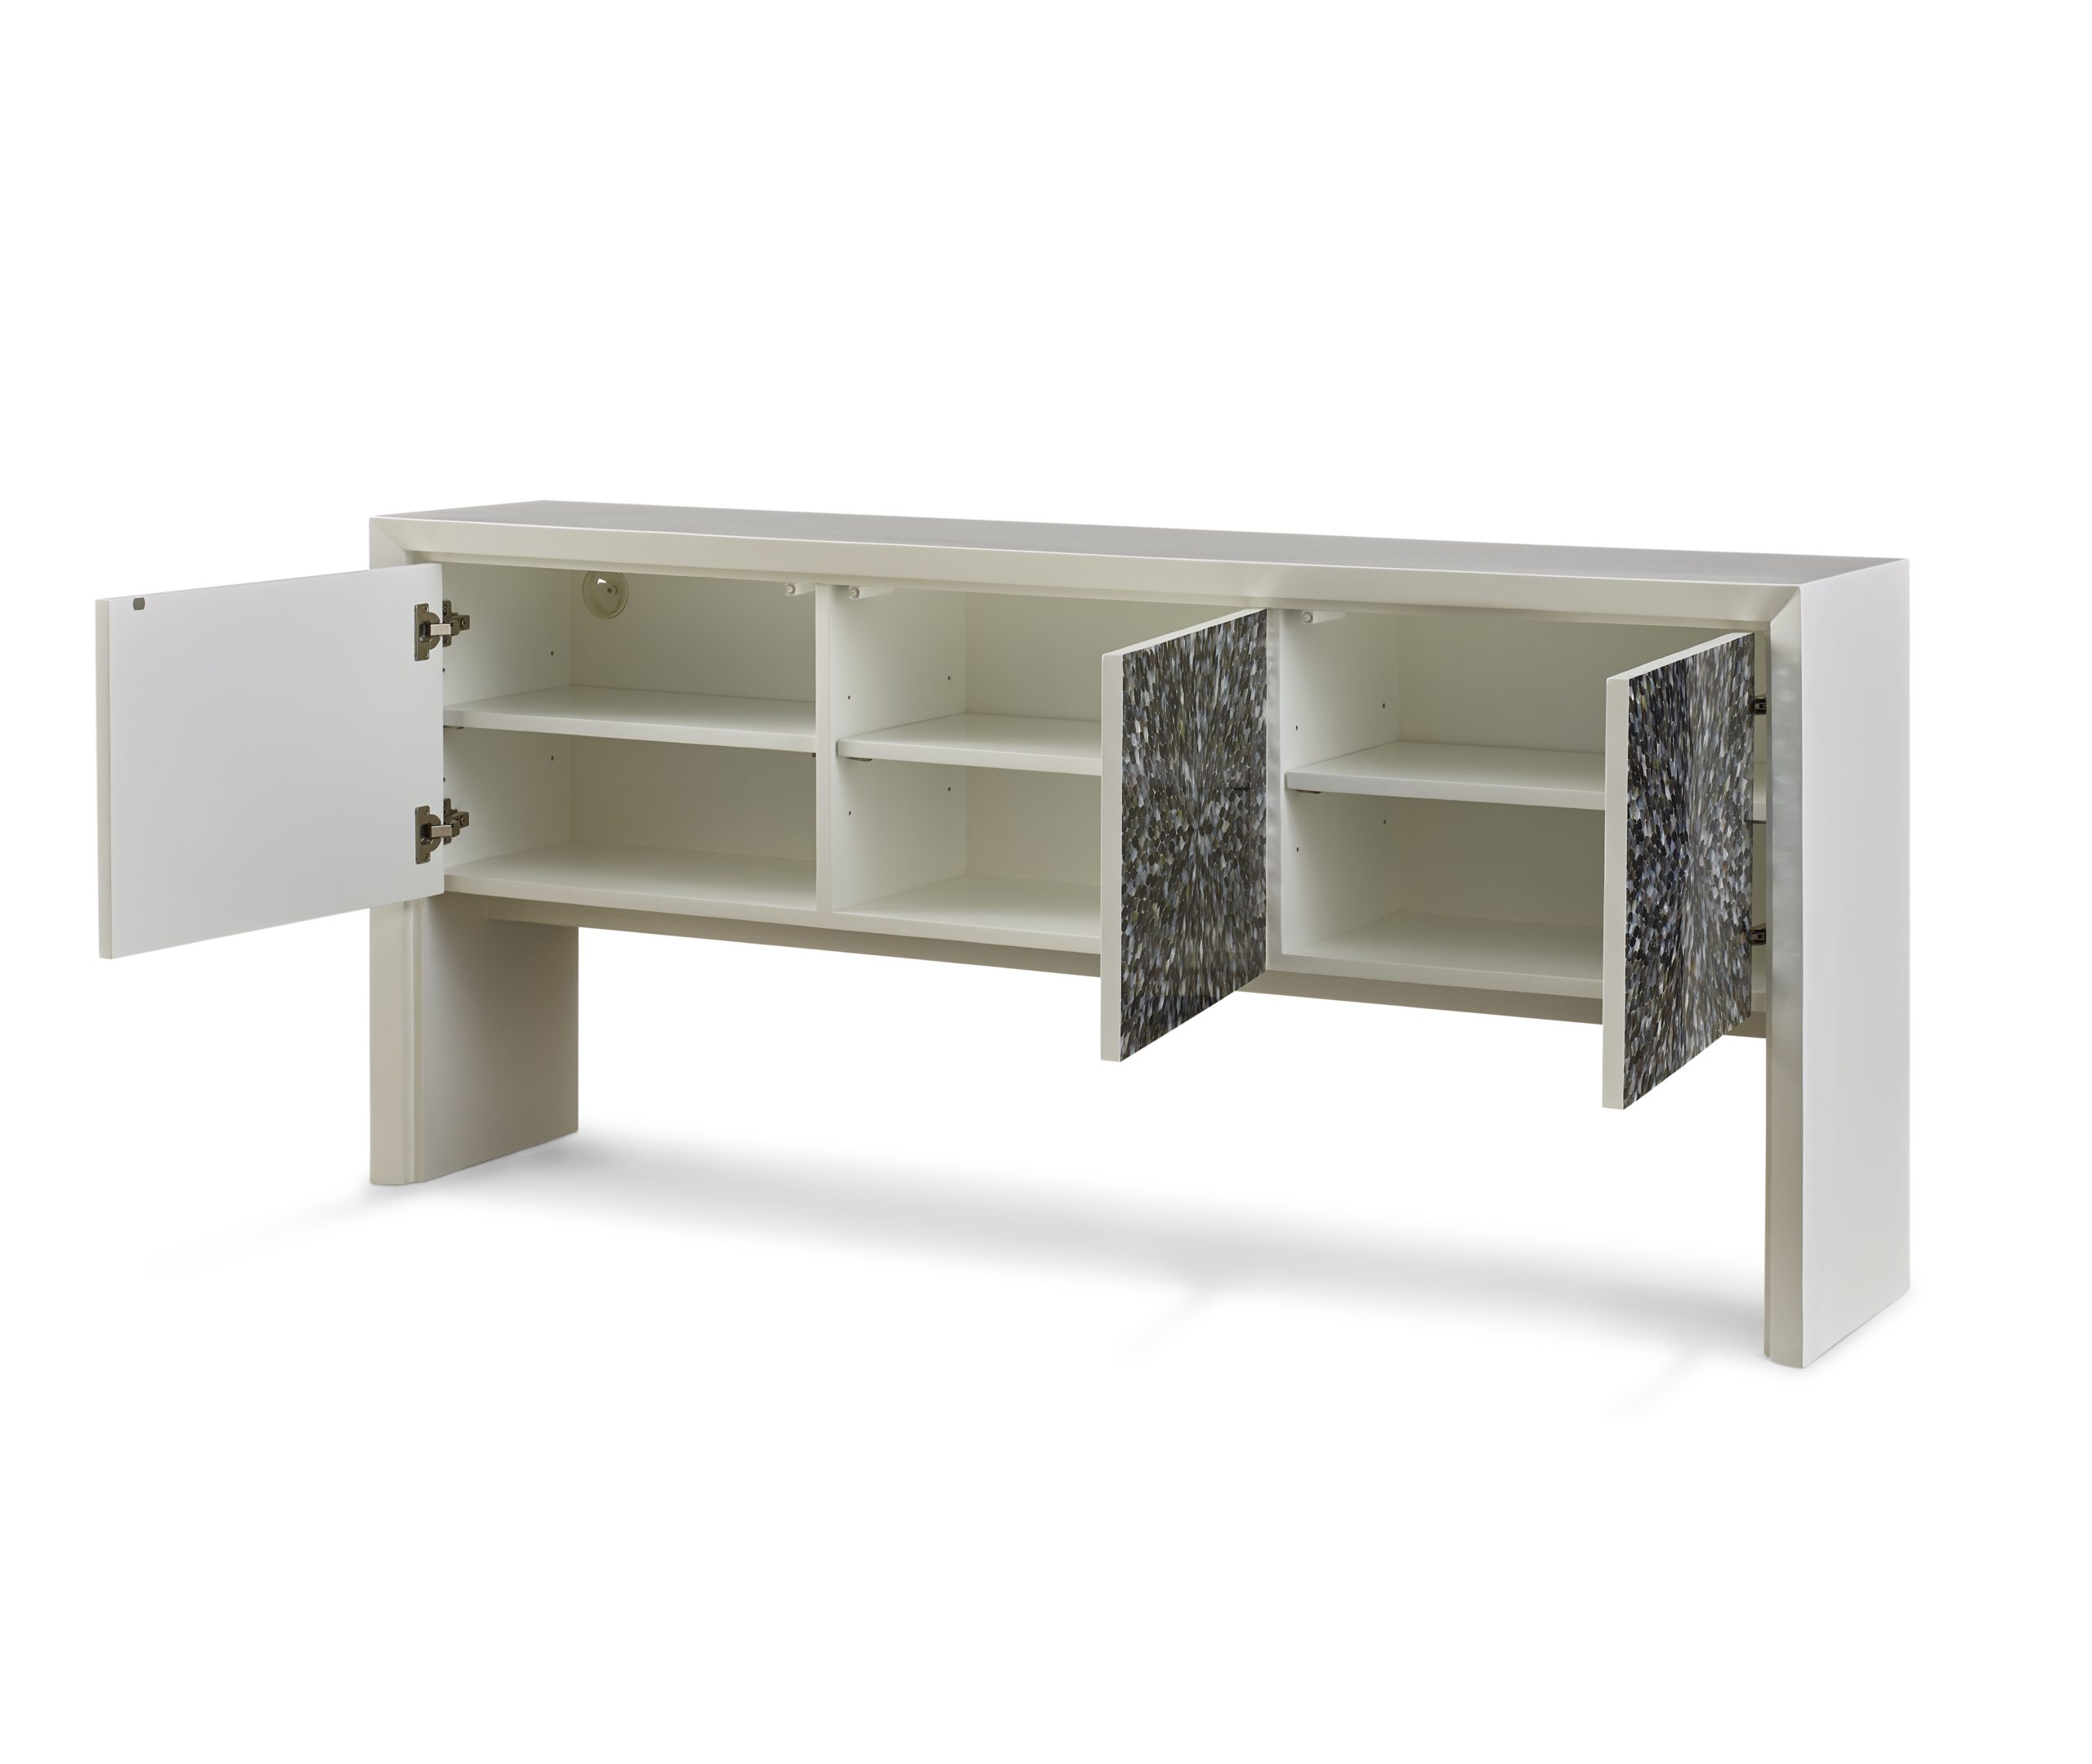 Baker_products_WNWN_nacre_sideboard_BAA3230_OPEN-scaled-1